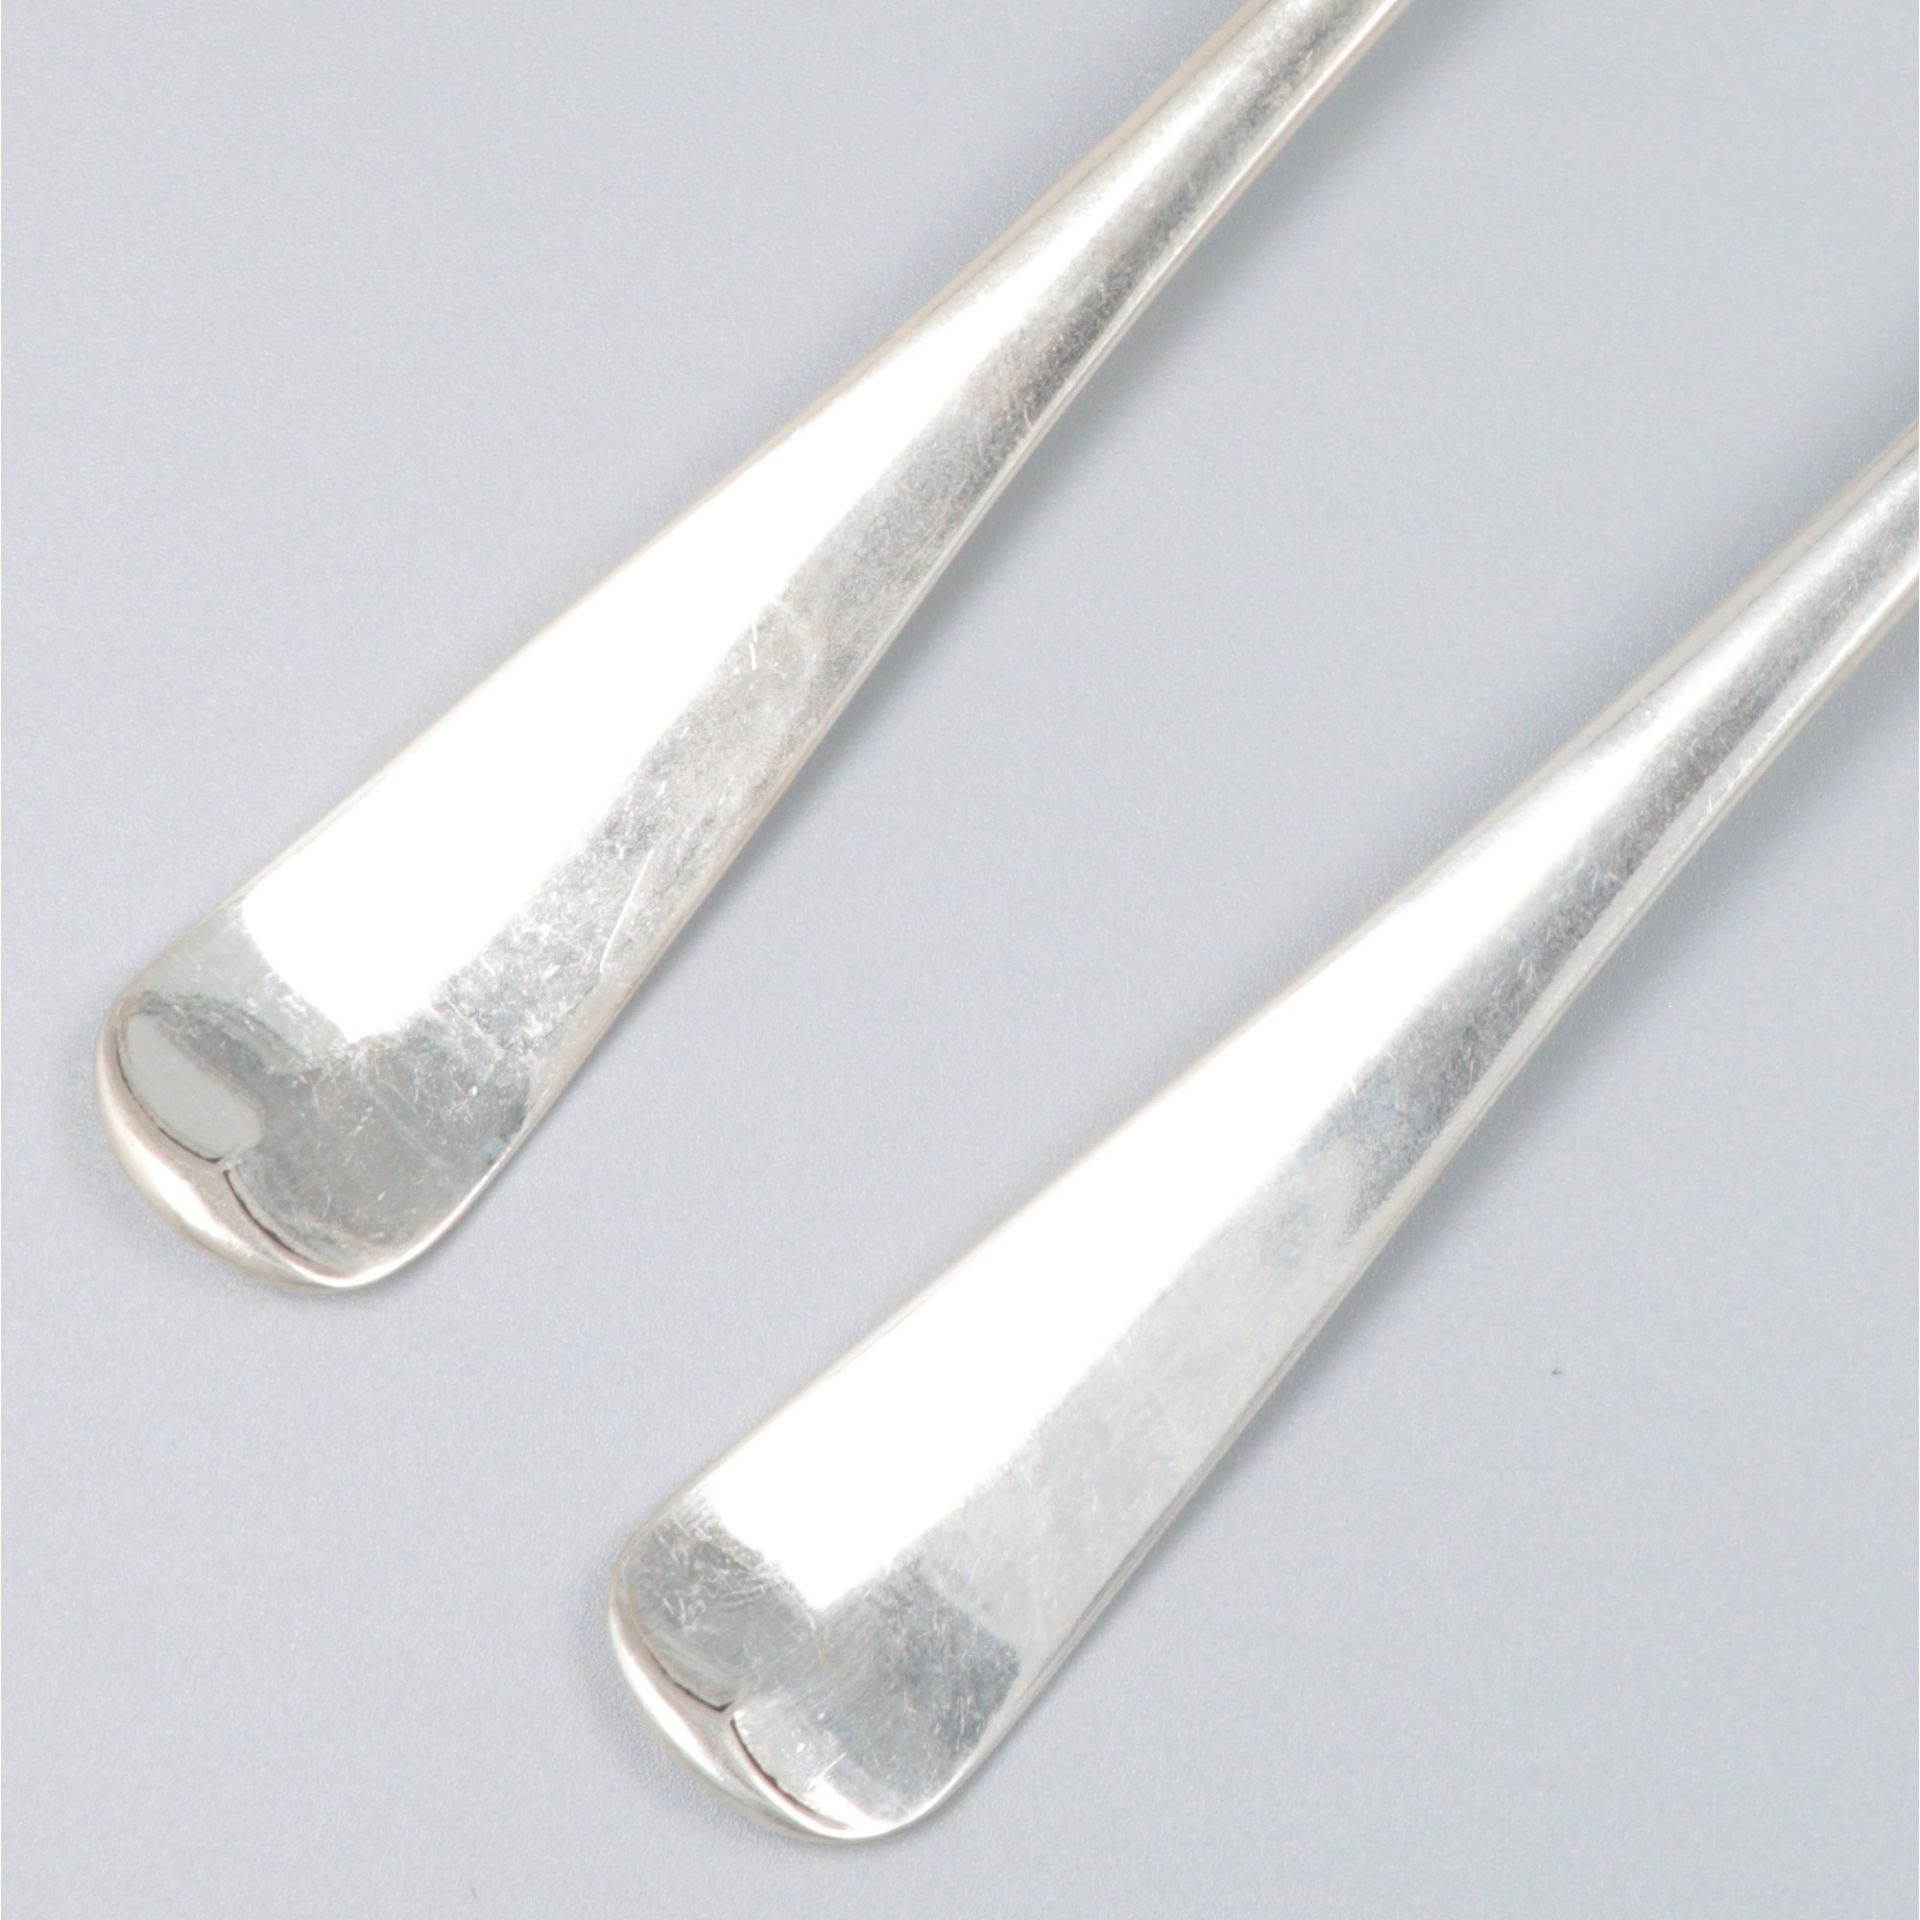 10-piece set of forks "Haags Lofje" silver. - Image 5 of 6